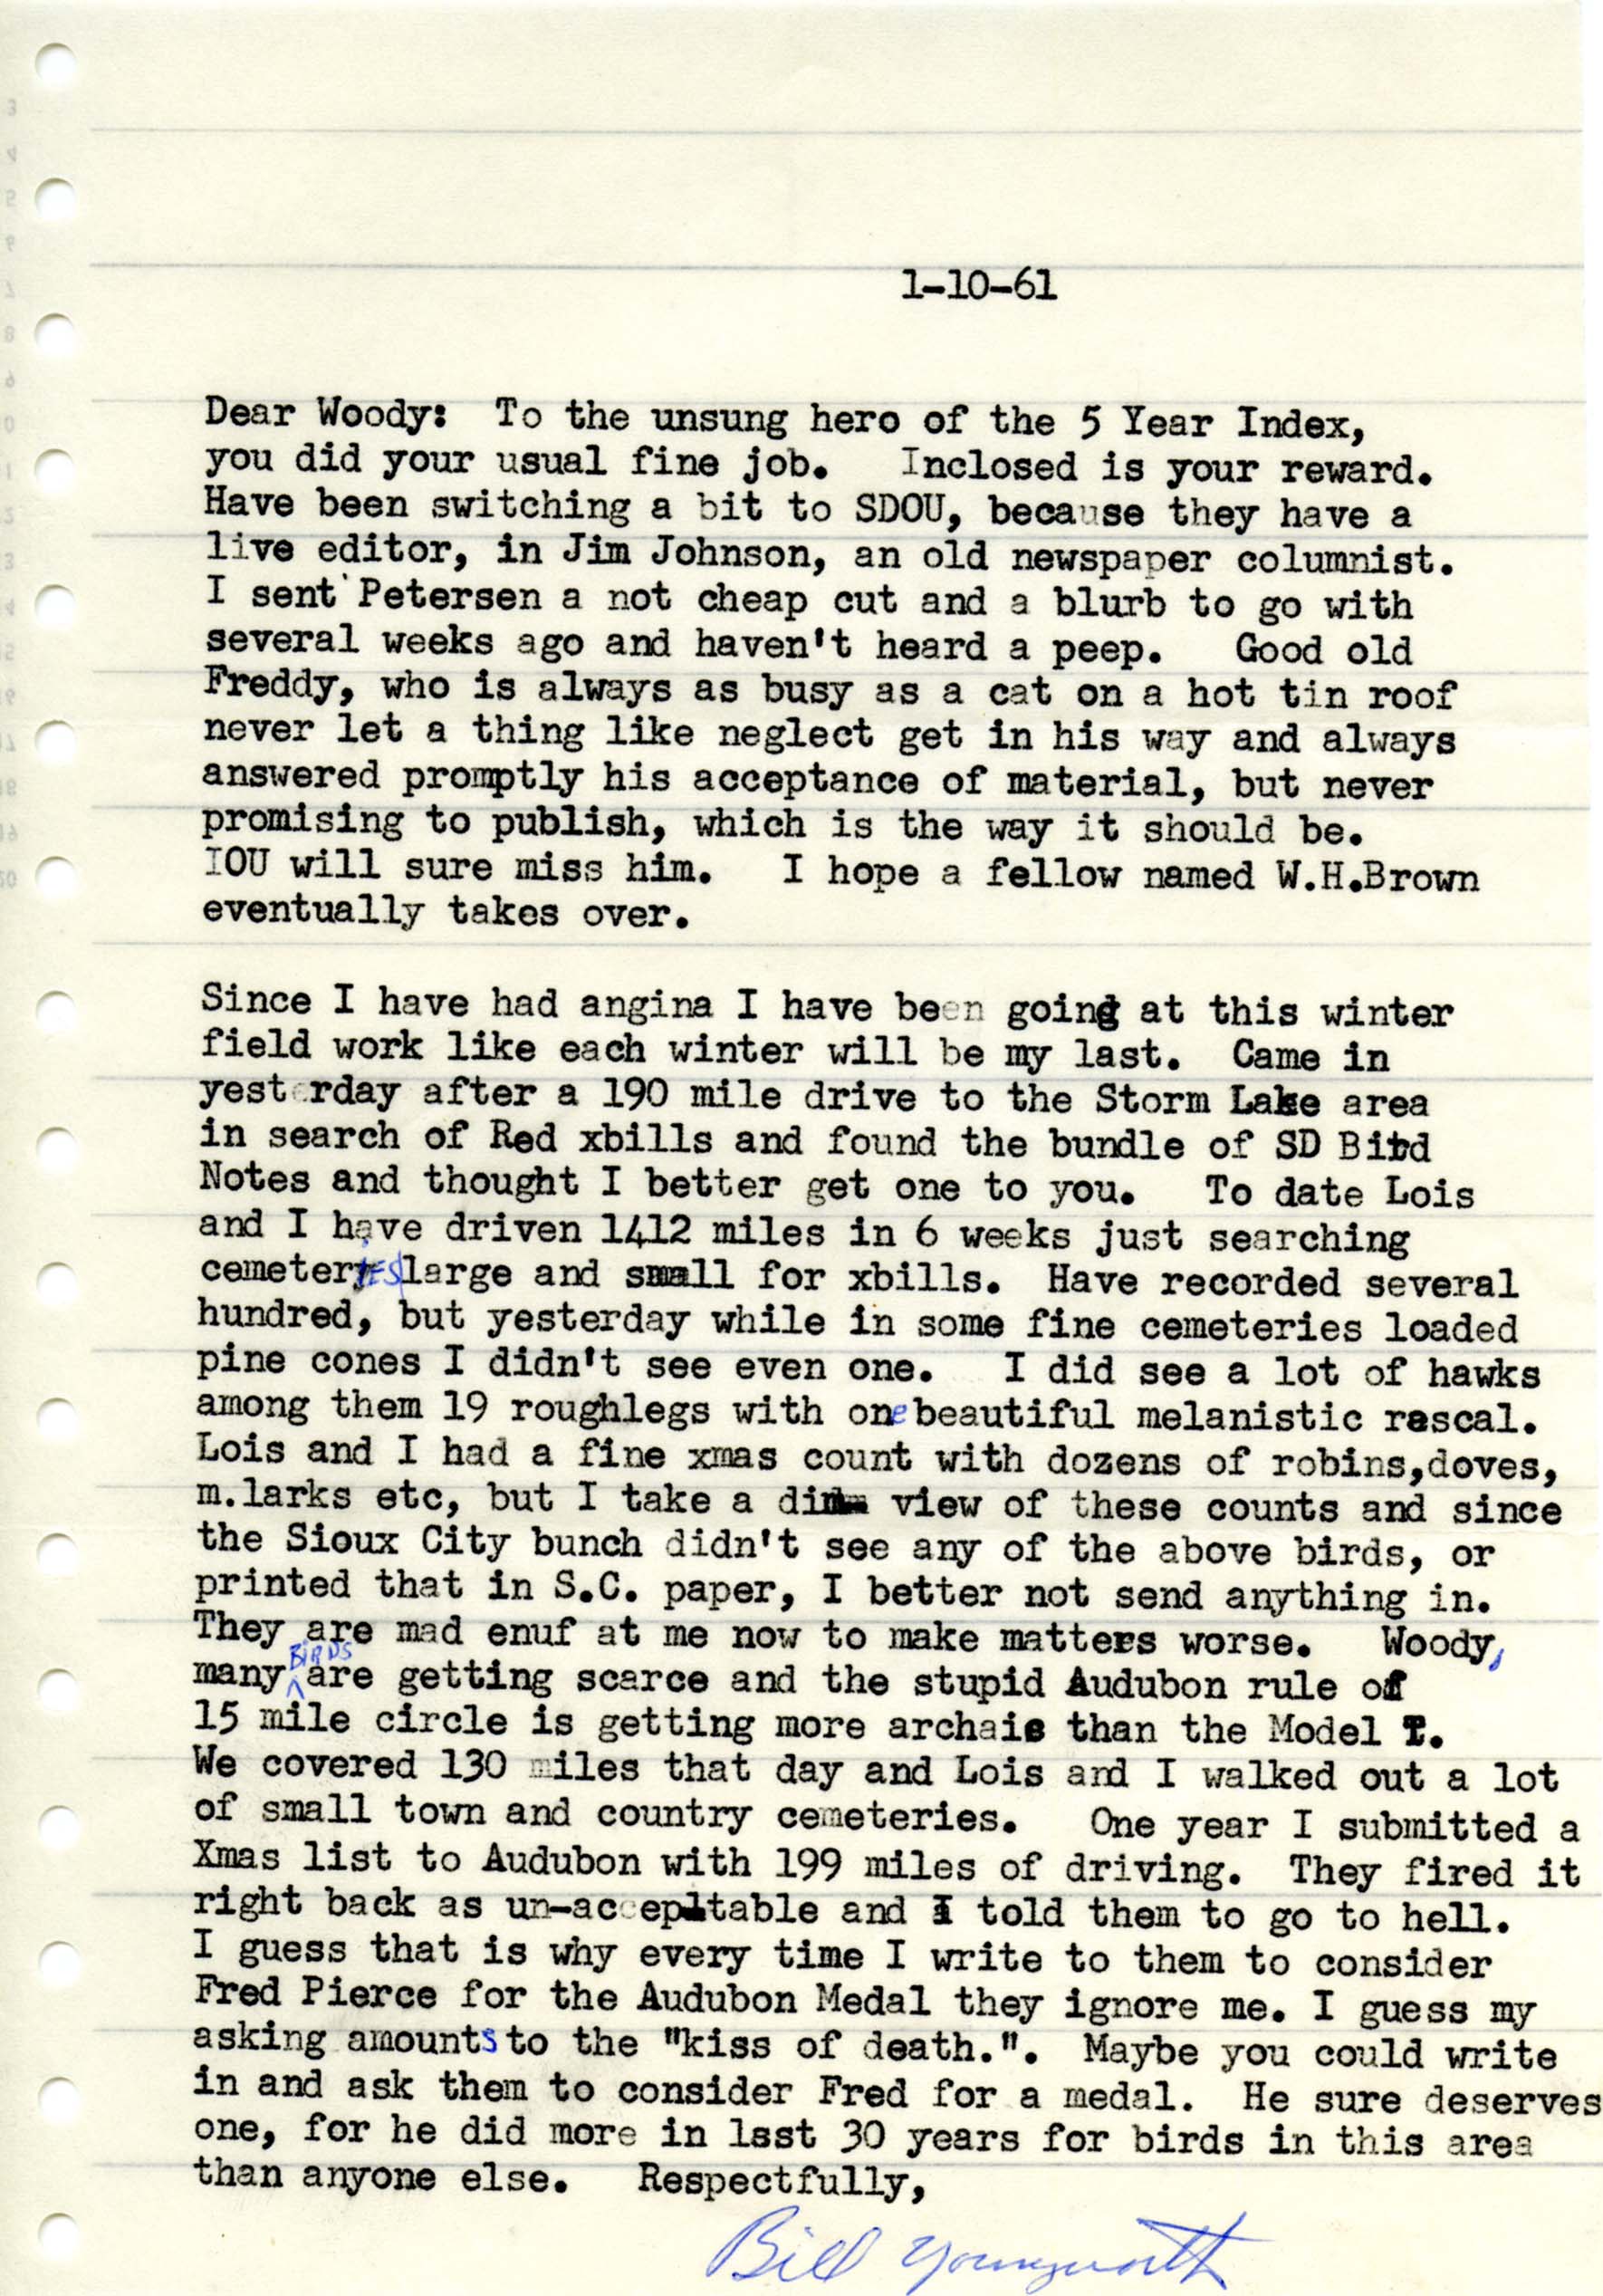 Bill Youngworth letter to Woodward Hart Brown regarding a new editor for Iowa Bird Life, January 10, 1961